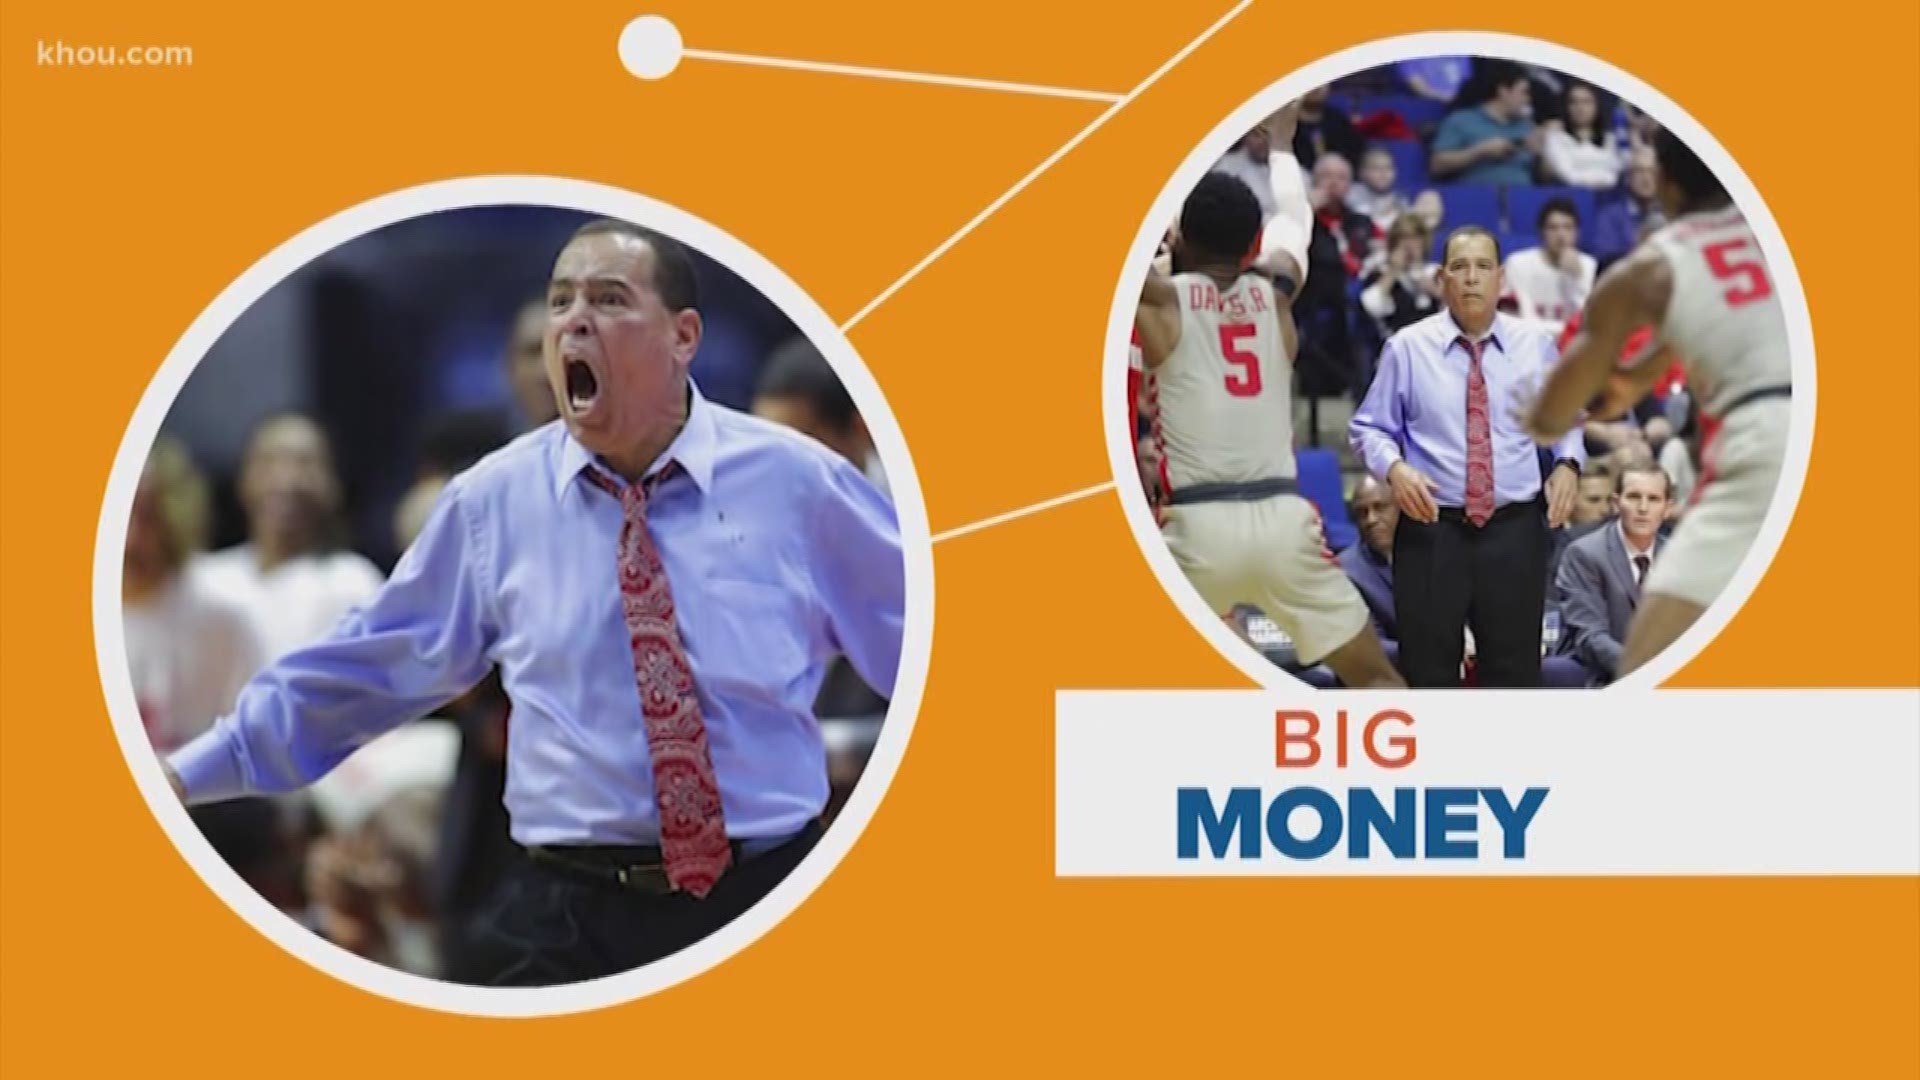 We know there's big money in college basketball, but it can really add up when it comes to tourney time. Janelle Bludau is connecting the dots!